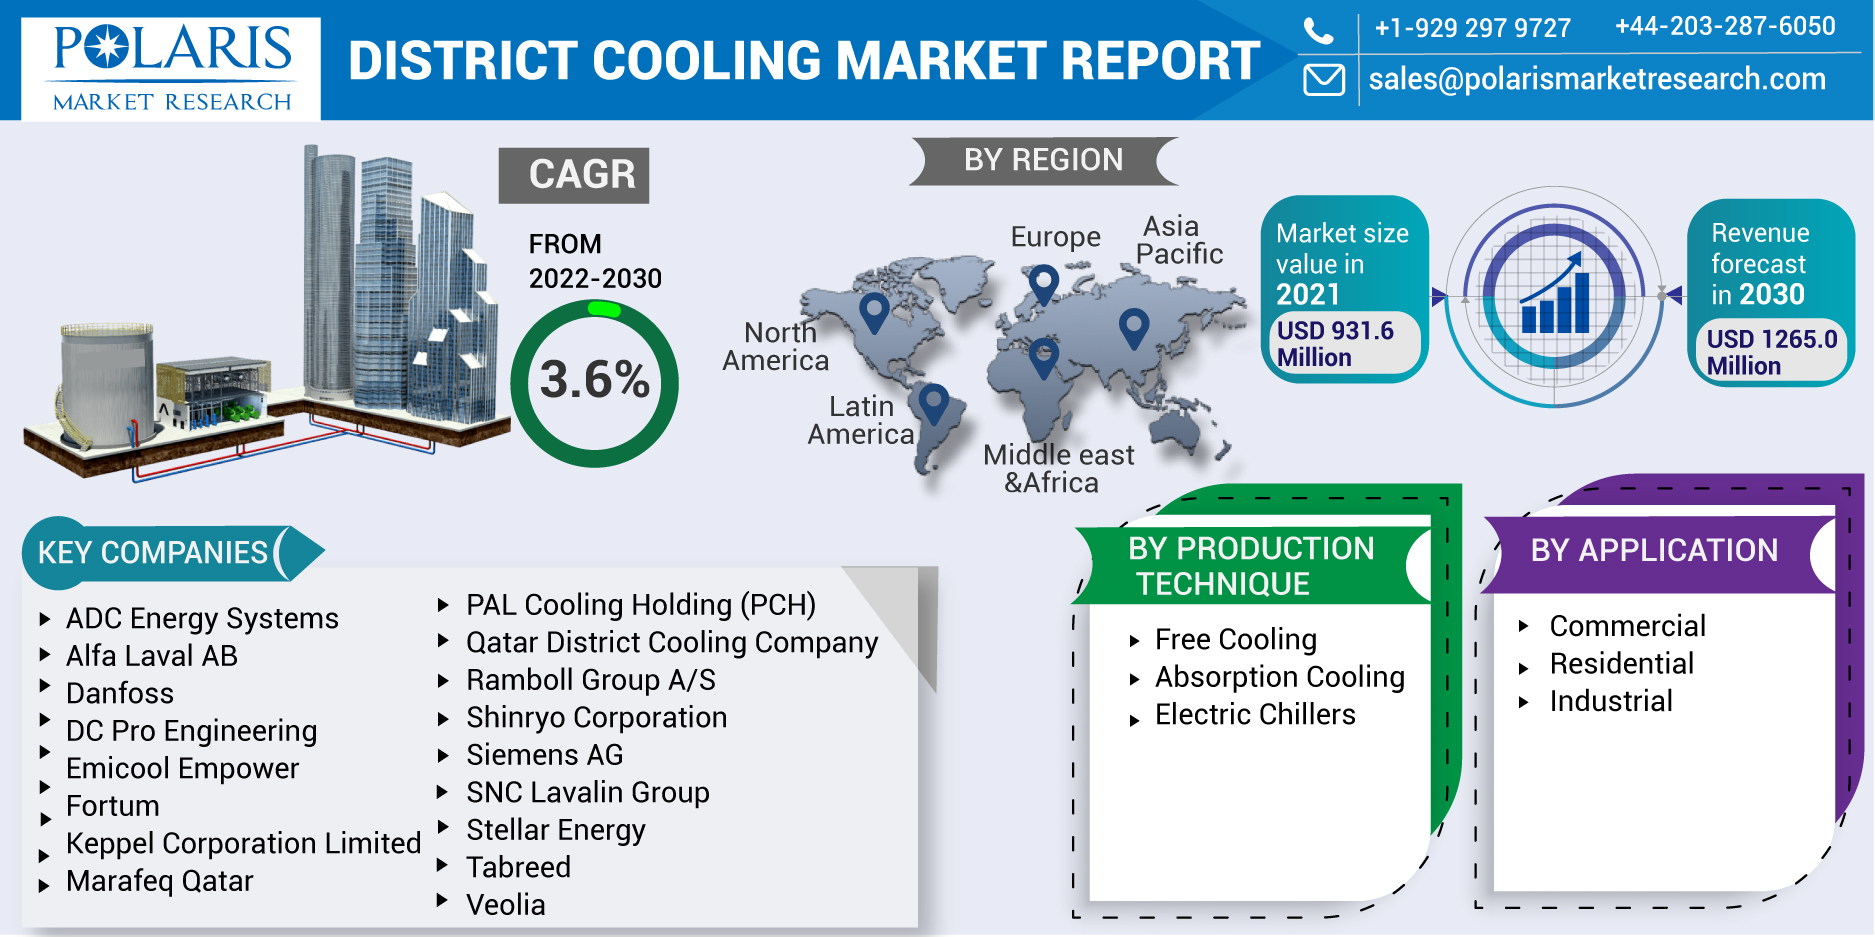 DISTRICT_COOLING_MARKET_REPORT-0111